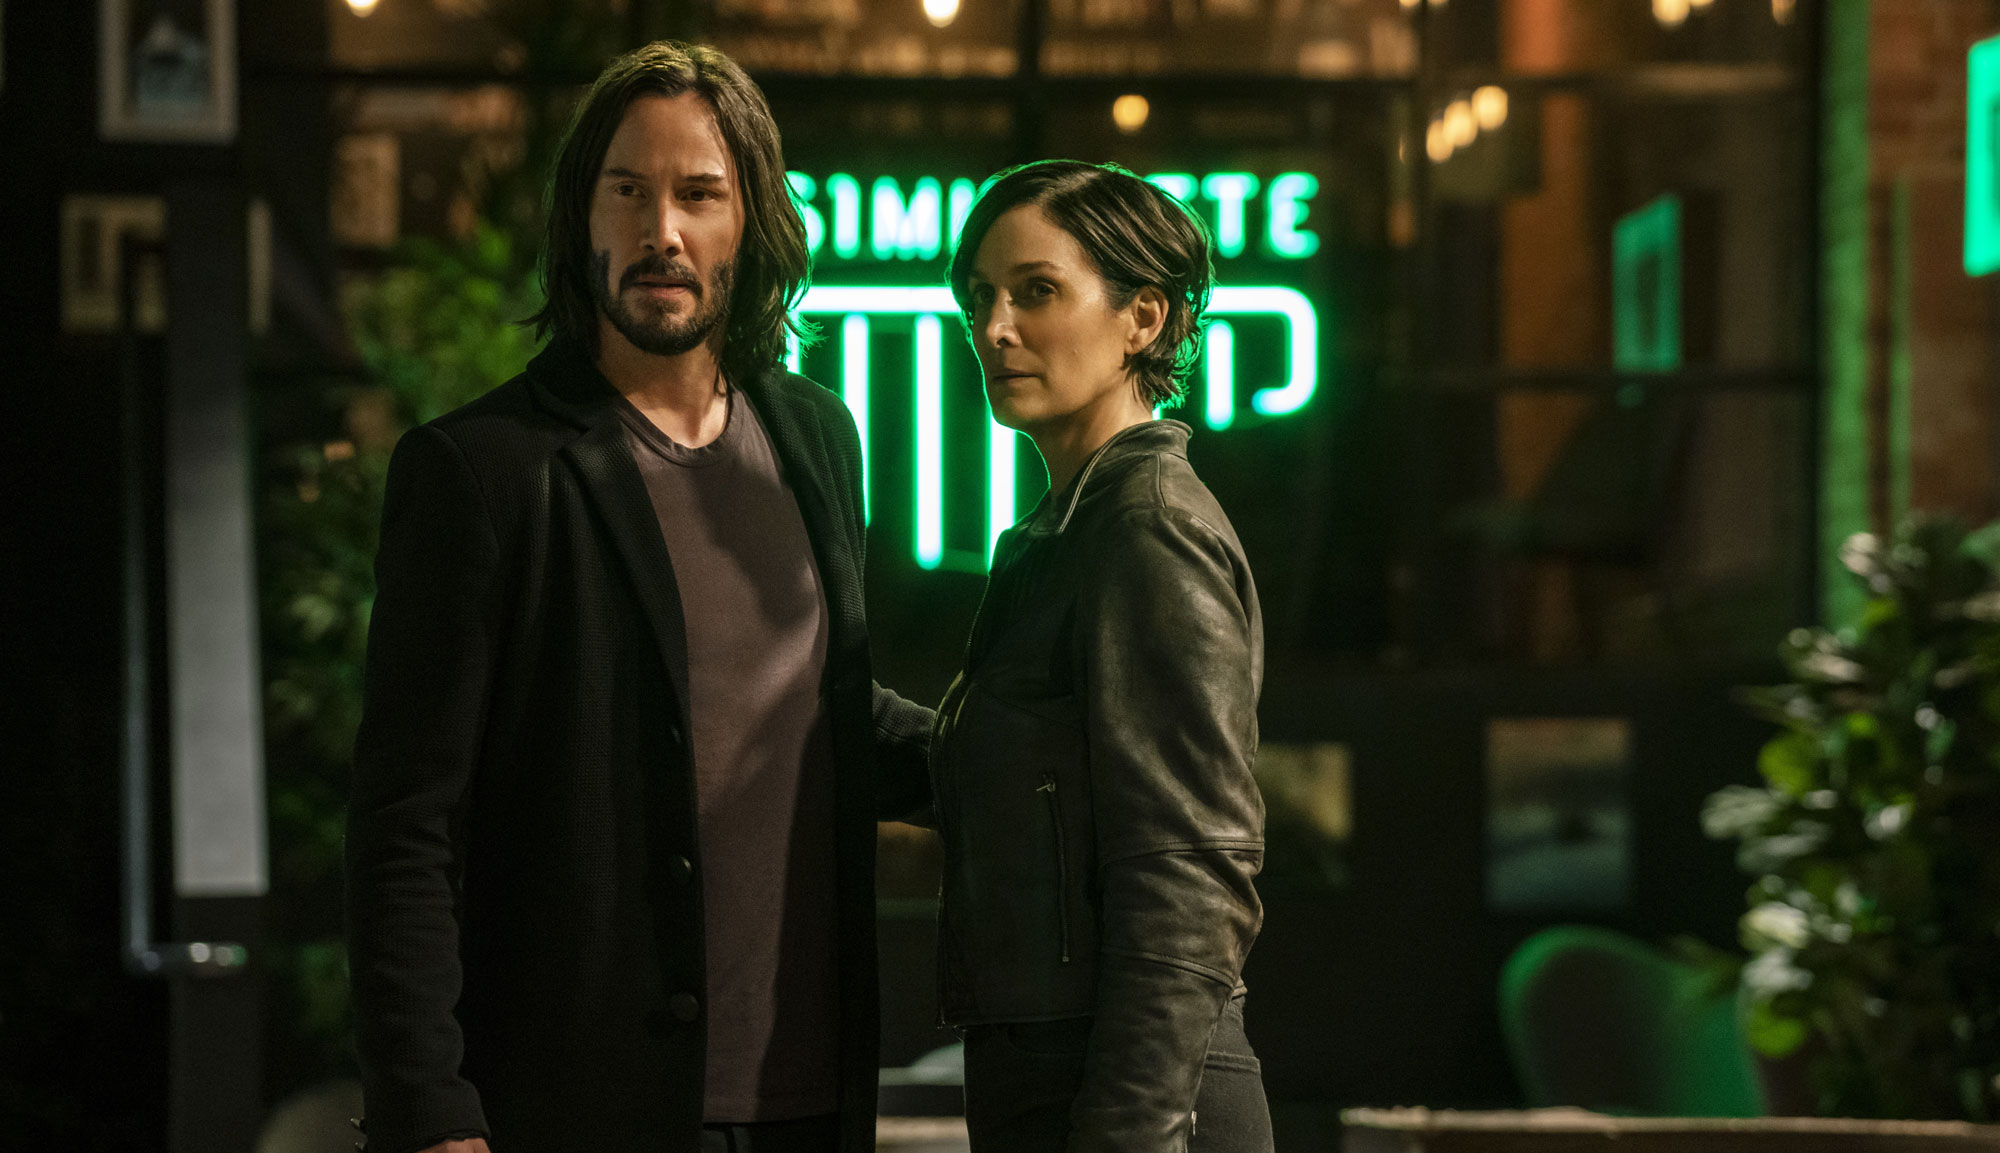 Keanu Reeves and Carrie-Anne Moss in "The Matrix Resurrections"